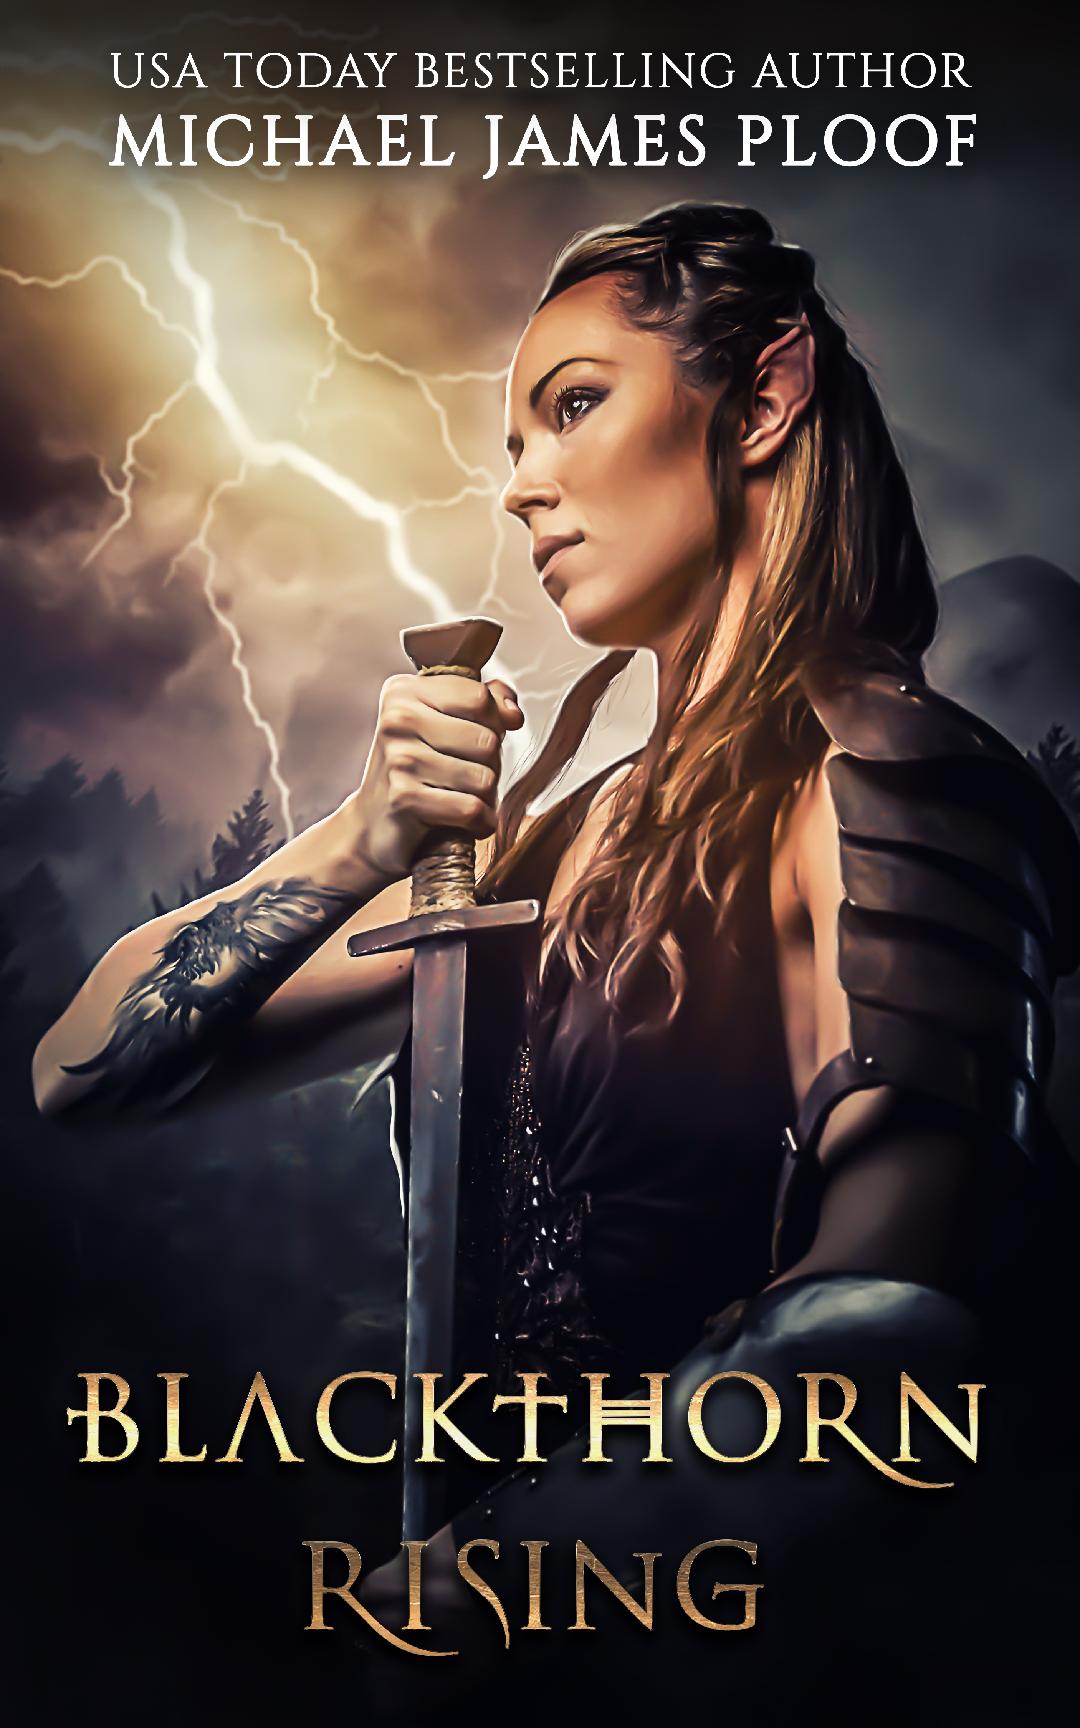 FREE: Blackthorn Rising: Legends of Agora by Michael James Ploof